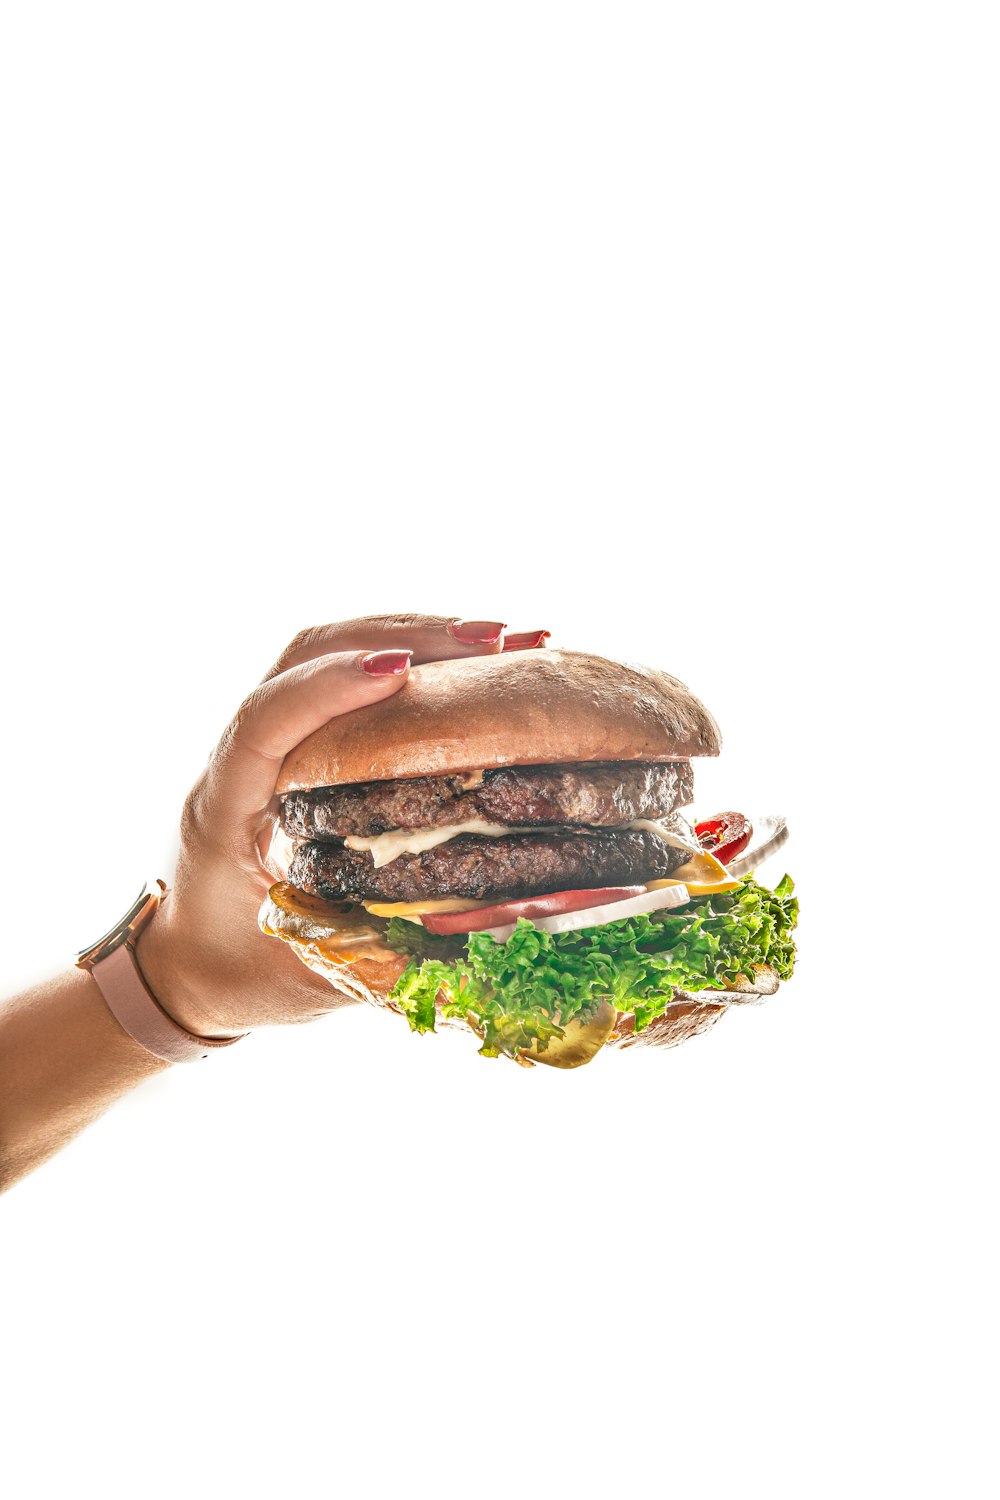 a person holding a hamburger in their hand